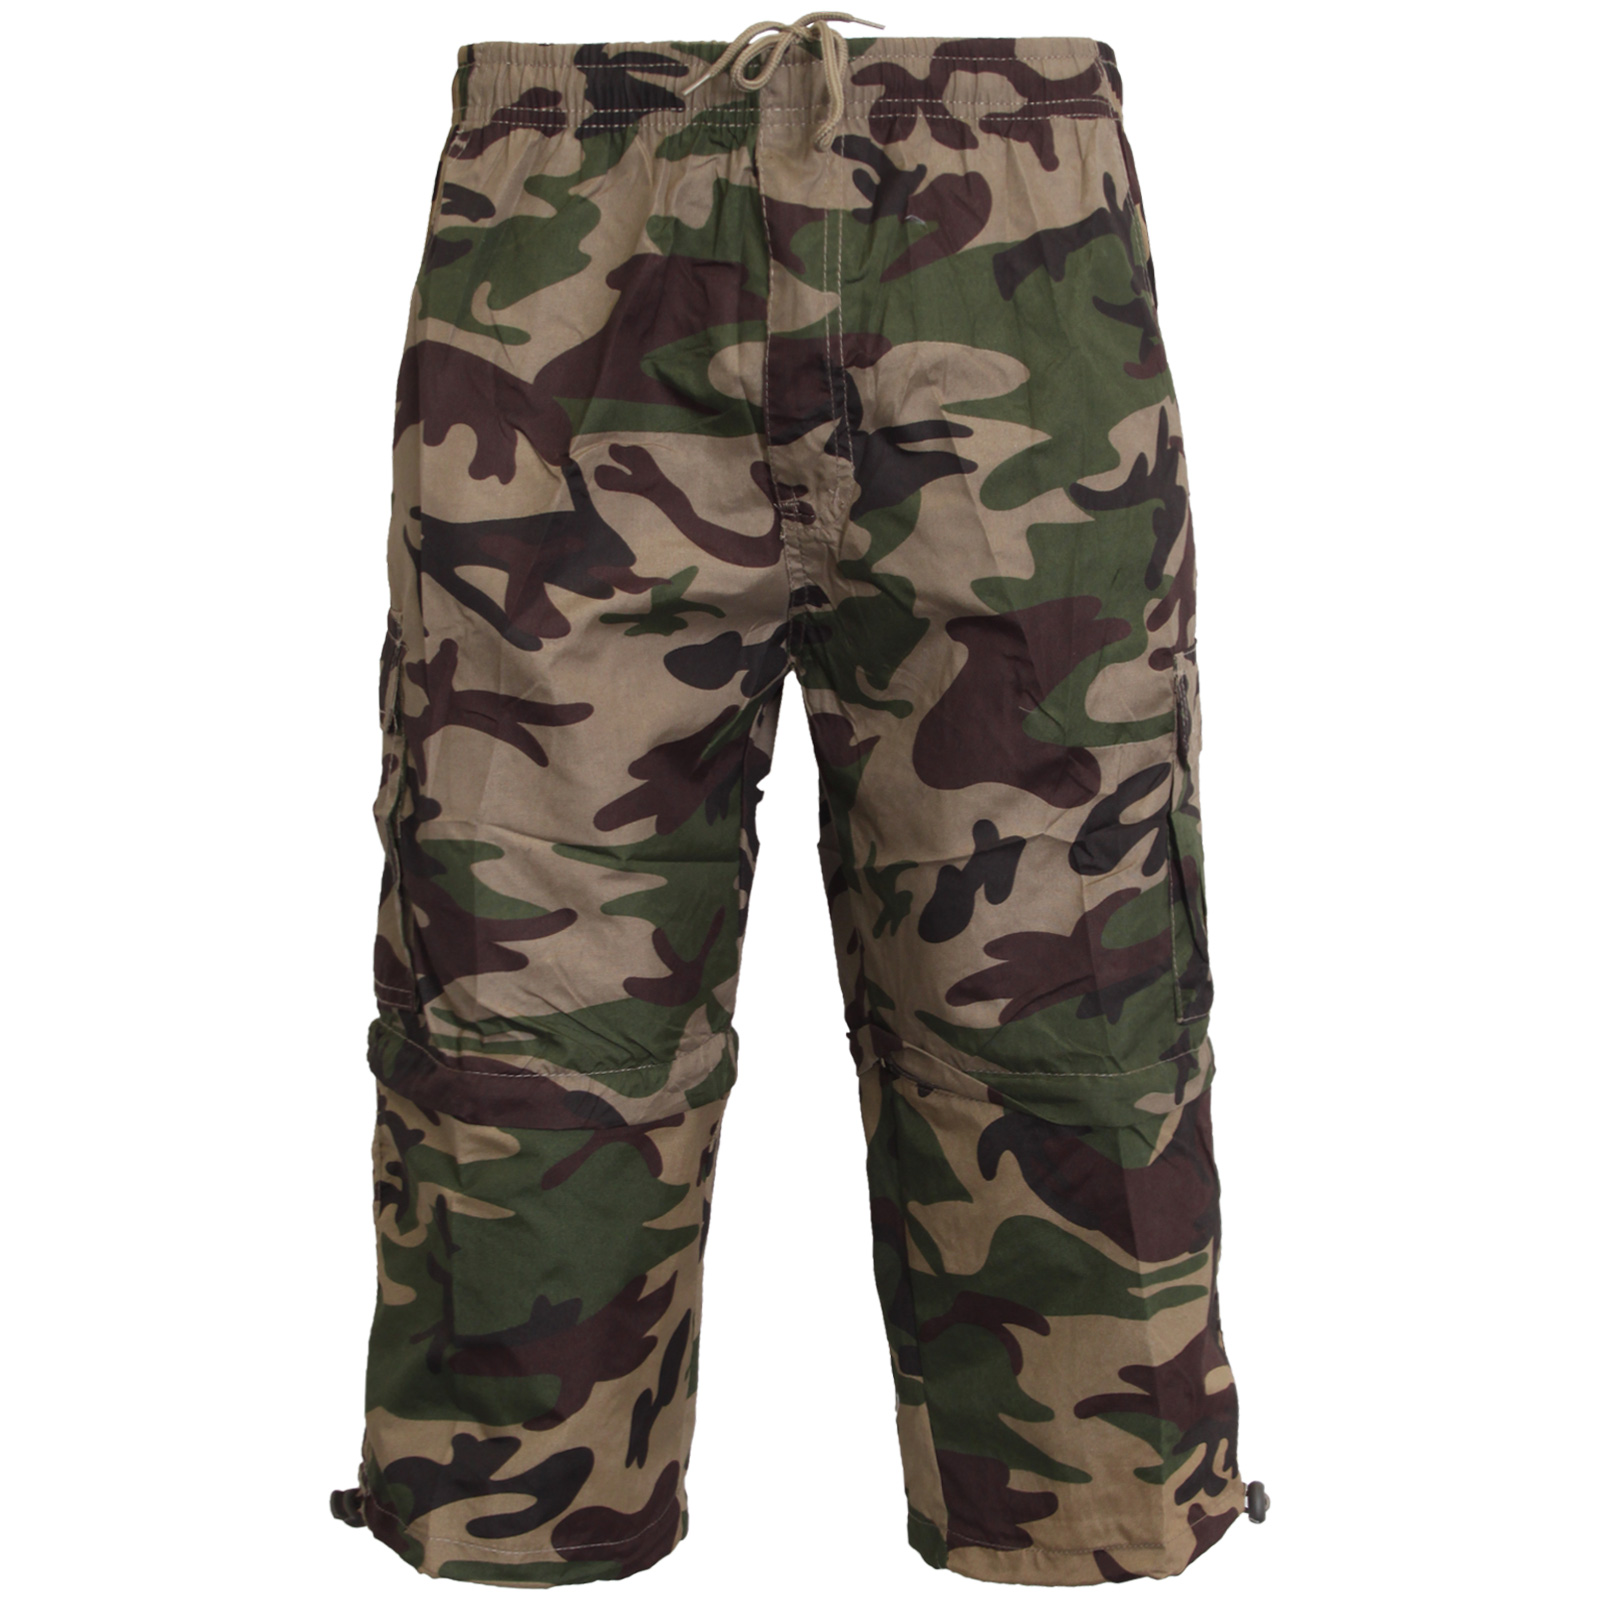 MENS 2 in 1 CAMO COMBAT CARGO ARMY ZIP OFF 3/4 TROUSERS & SHORTS CASUAL  M L XL